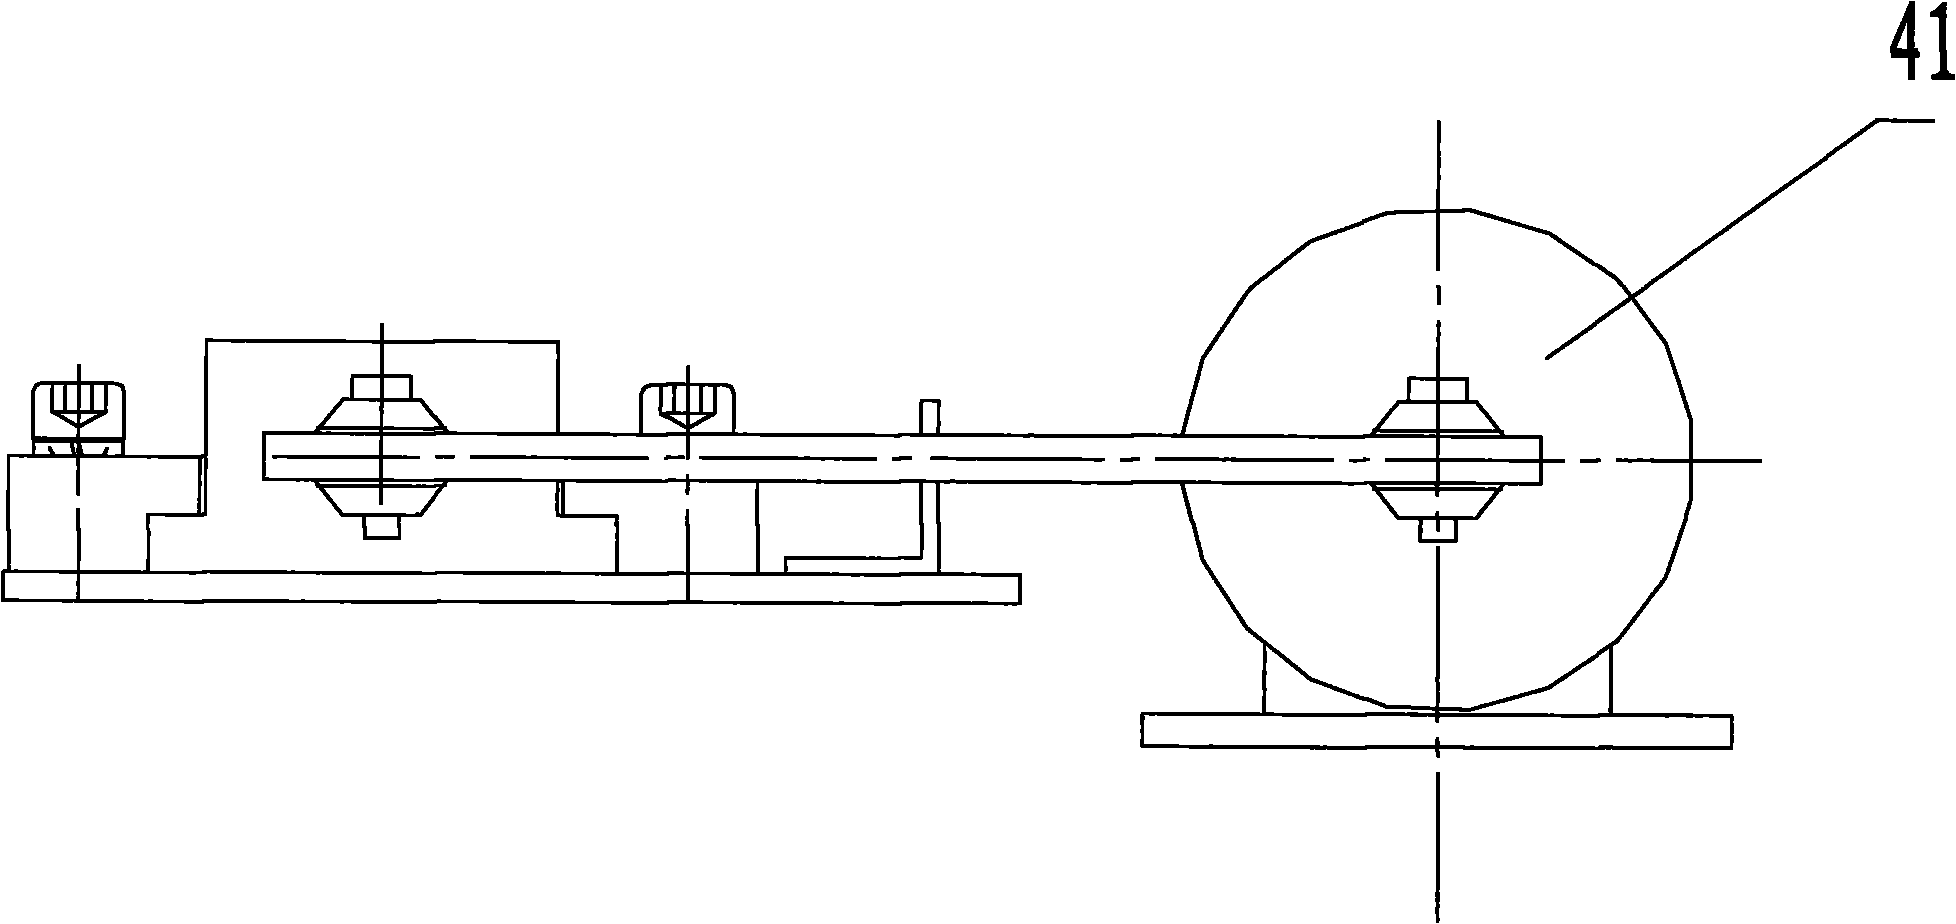 Anti-secondary hit device of drop hammer impact tester